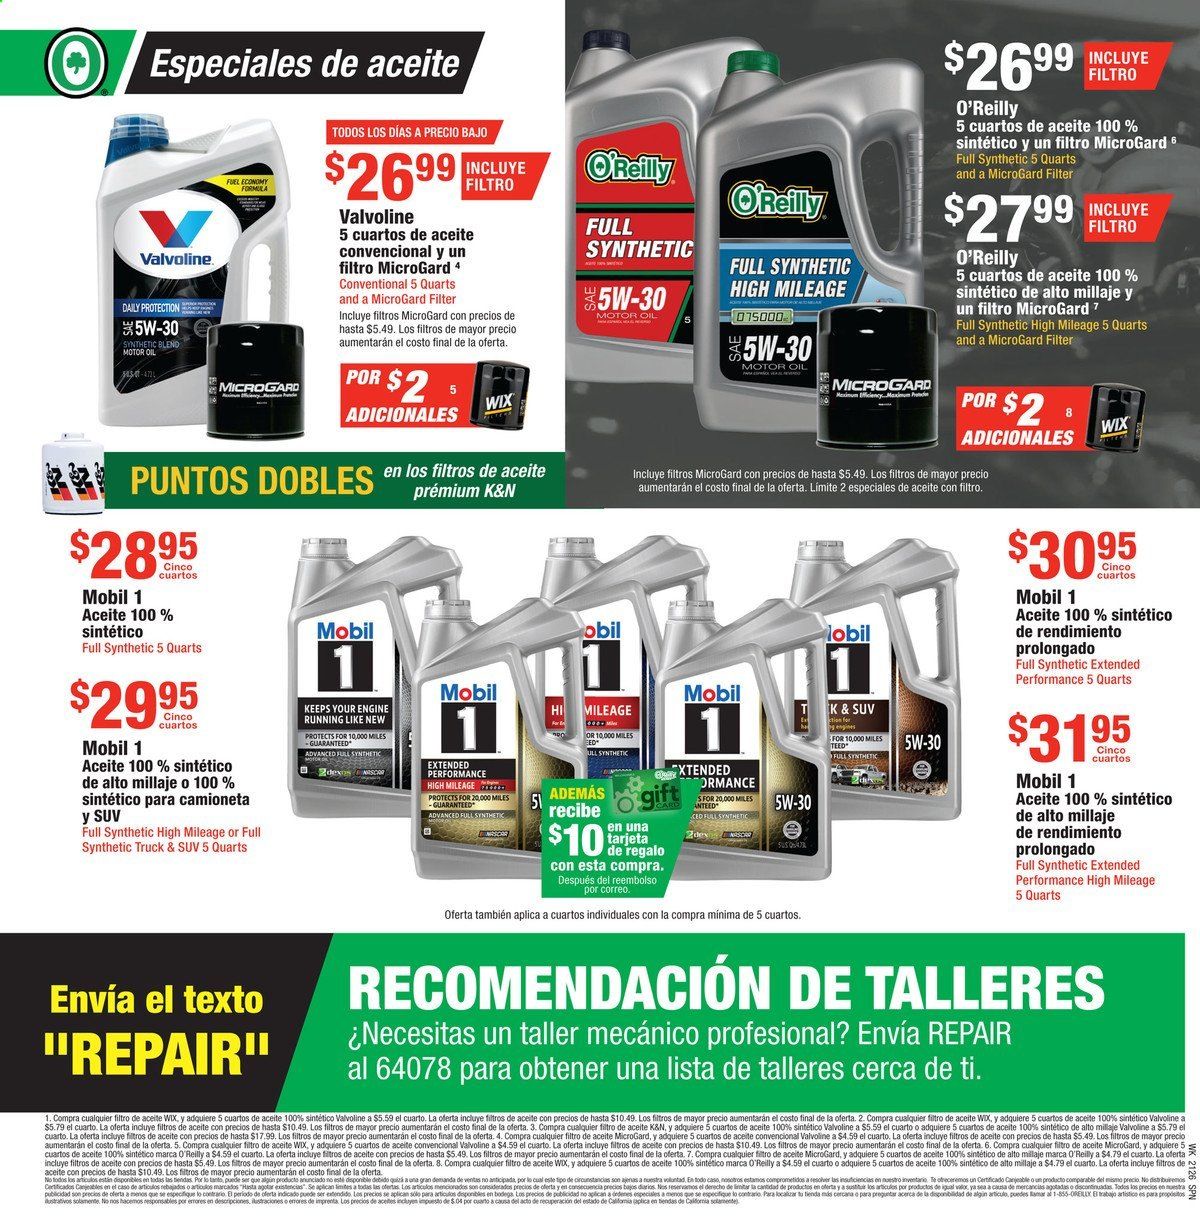 O'Reilly Auto Parts Weekly Ad Flyer June 30 to July 27